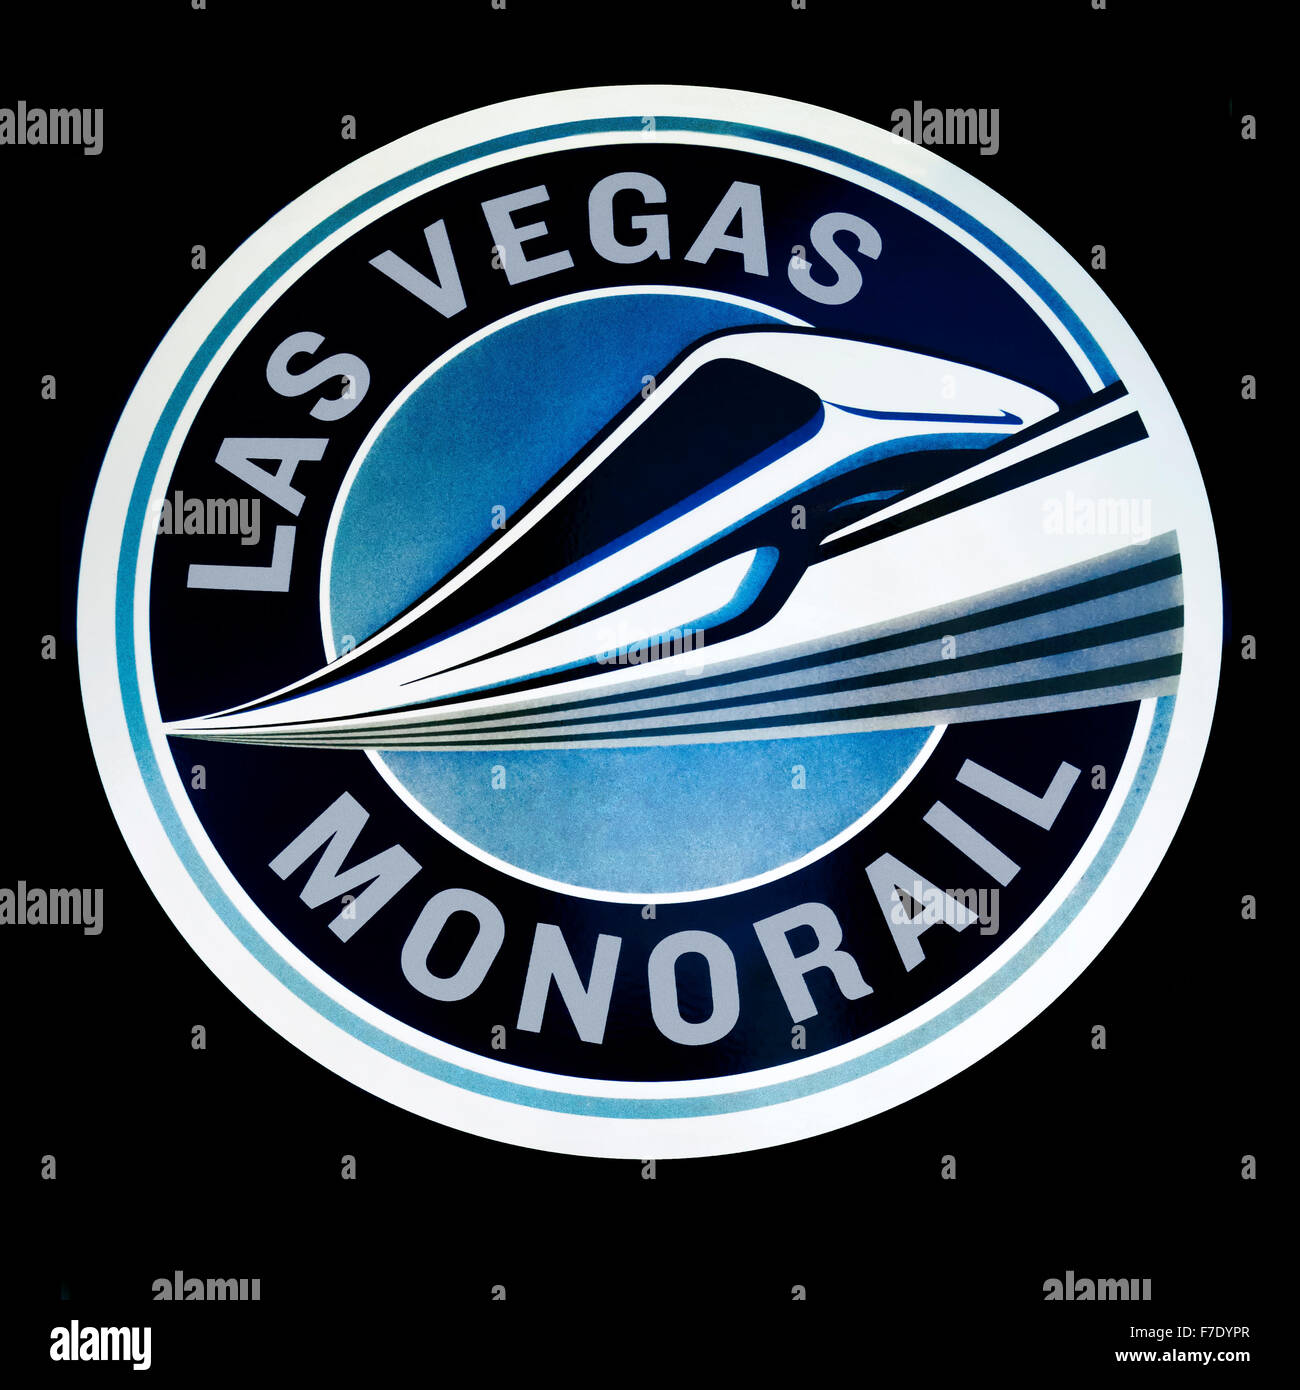 A sign for the Las Vegas Monorail system Stock Photo